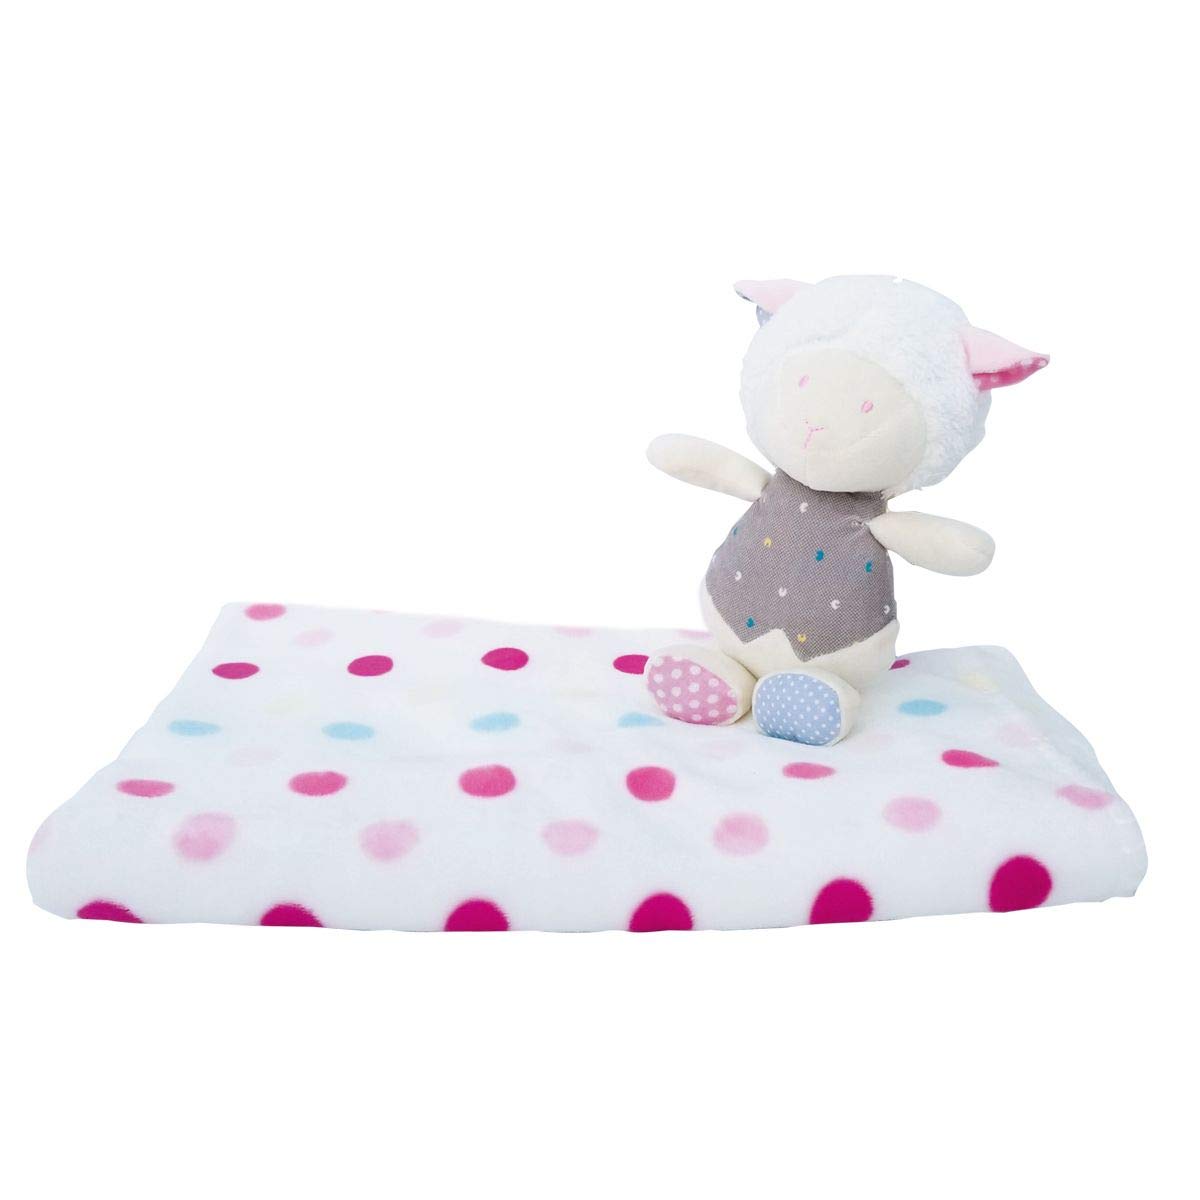 Bieco 04004113 Baby Cuddle Set with Cuddly Blanket and Plush Sheep, Cuddle Set with White Blanket with Pink Dots and Cuddly Toy Sheep for Babies from 3 m+, Pink